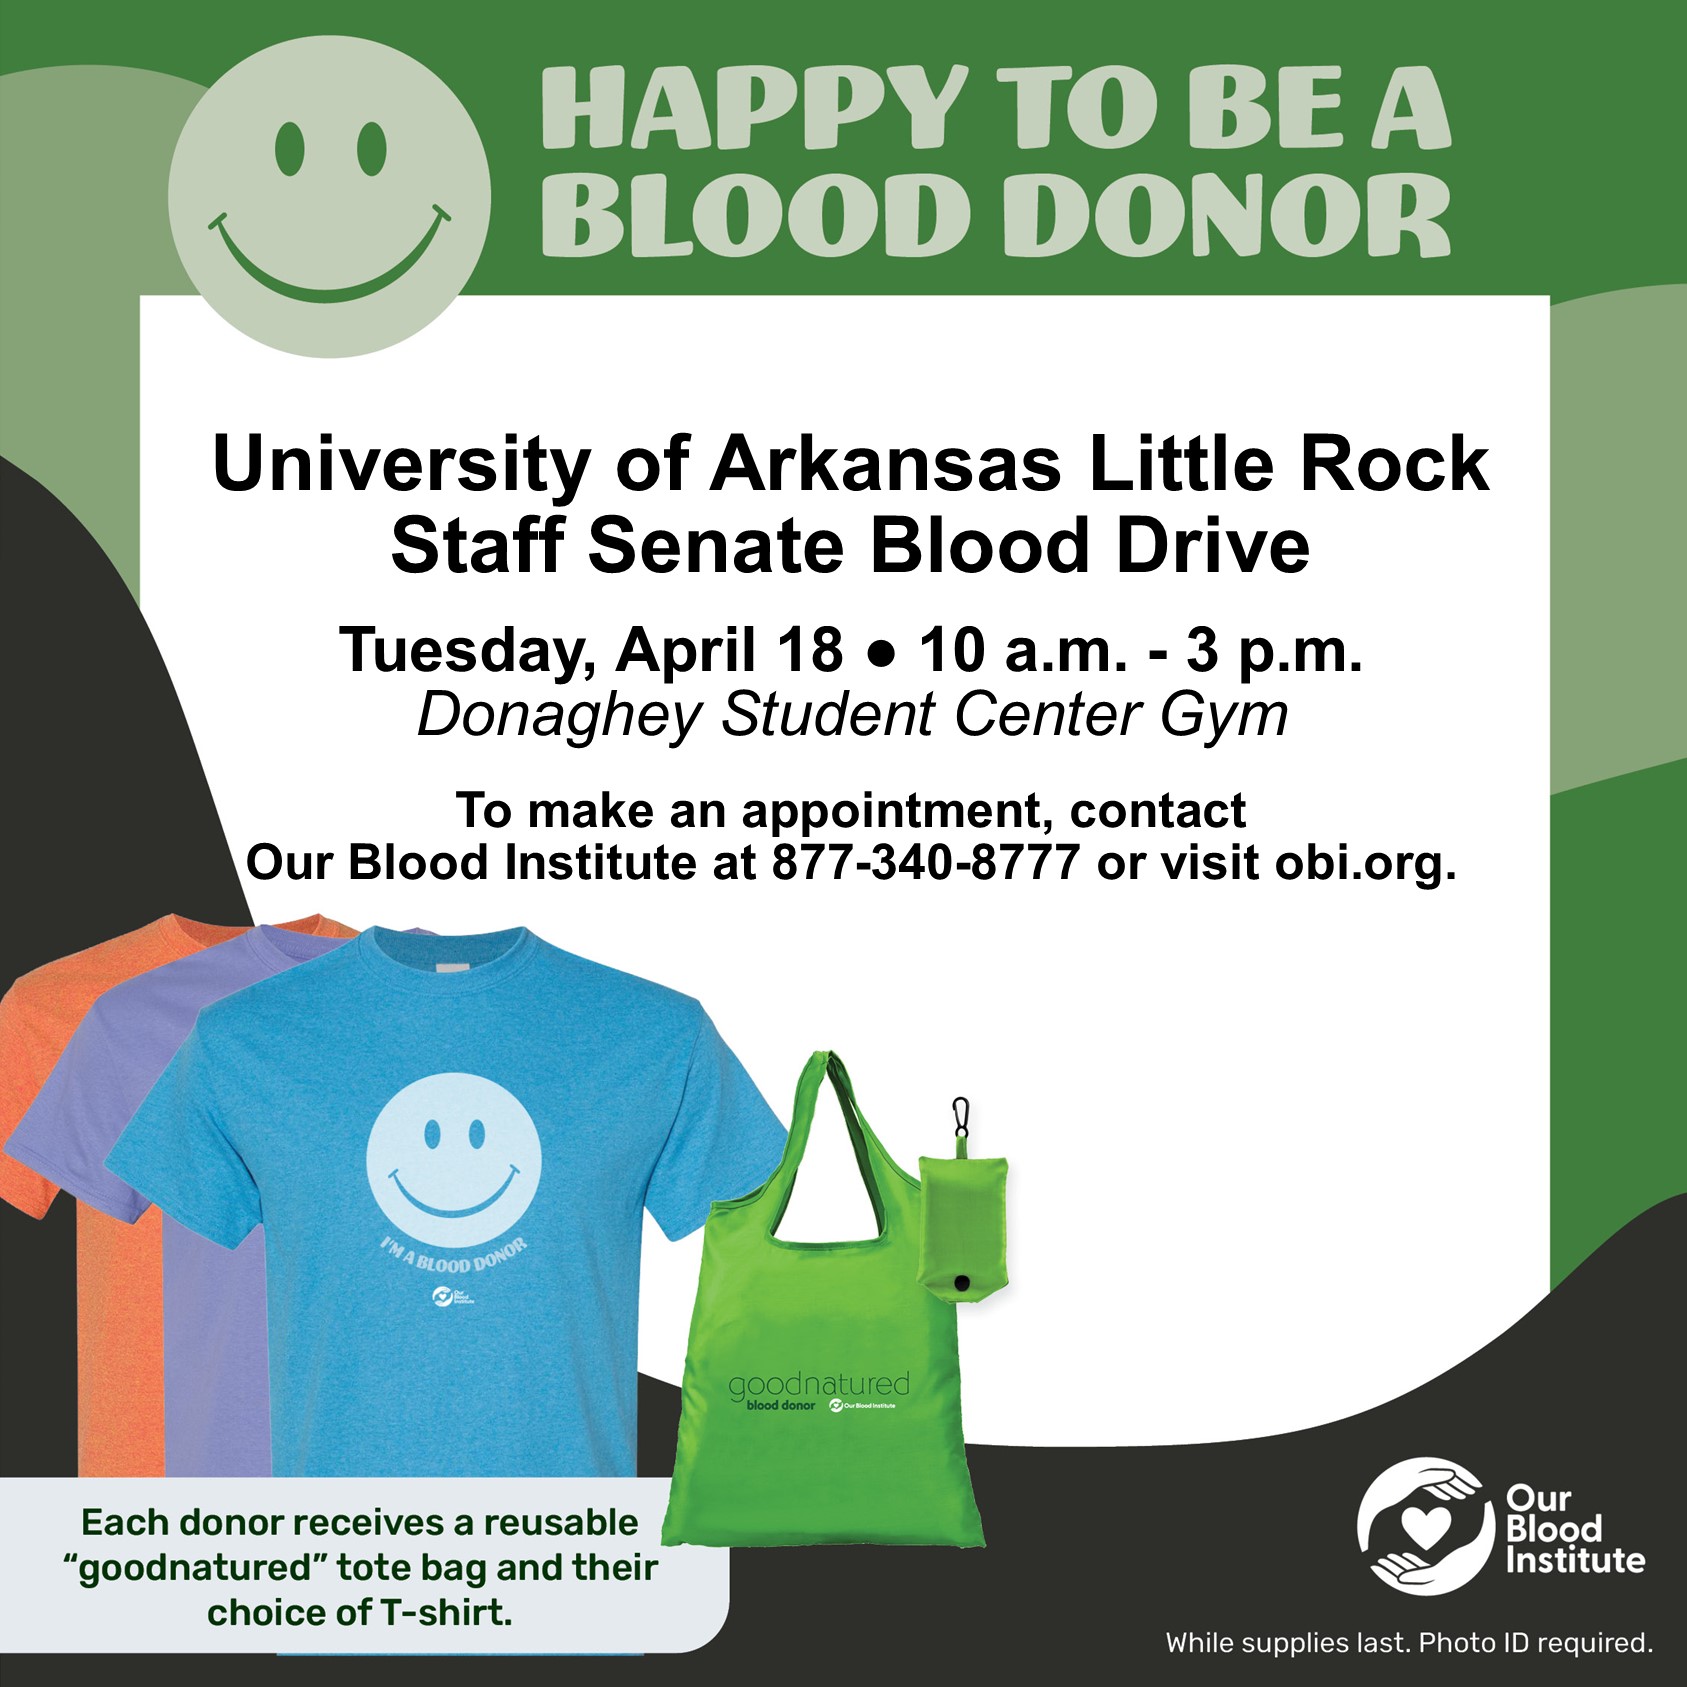 The UA Little Rock Staff Senate will hold a blood drive from 10 a.m. to 3 p.m. Tuesday, April 18, inside the Donaghey Student Center Fitness Center.